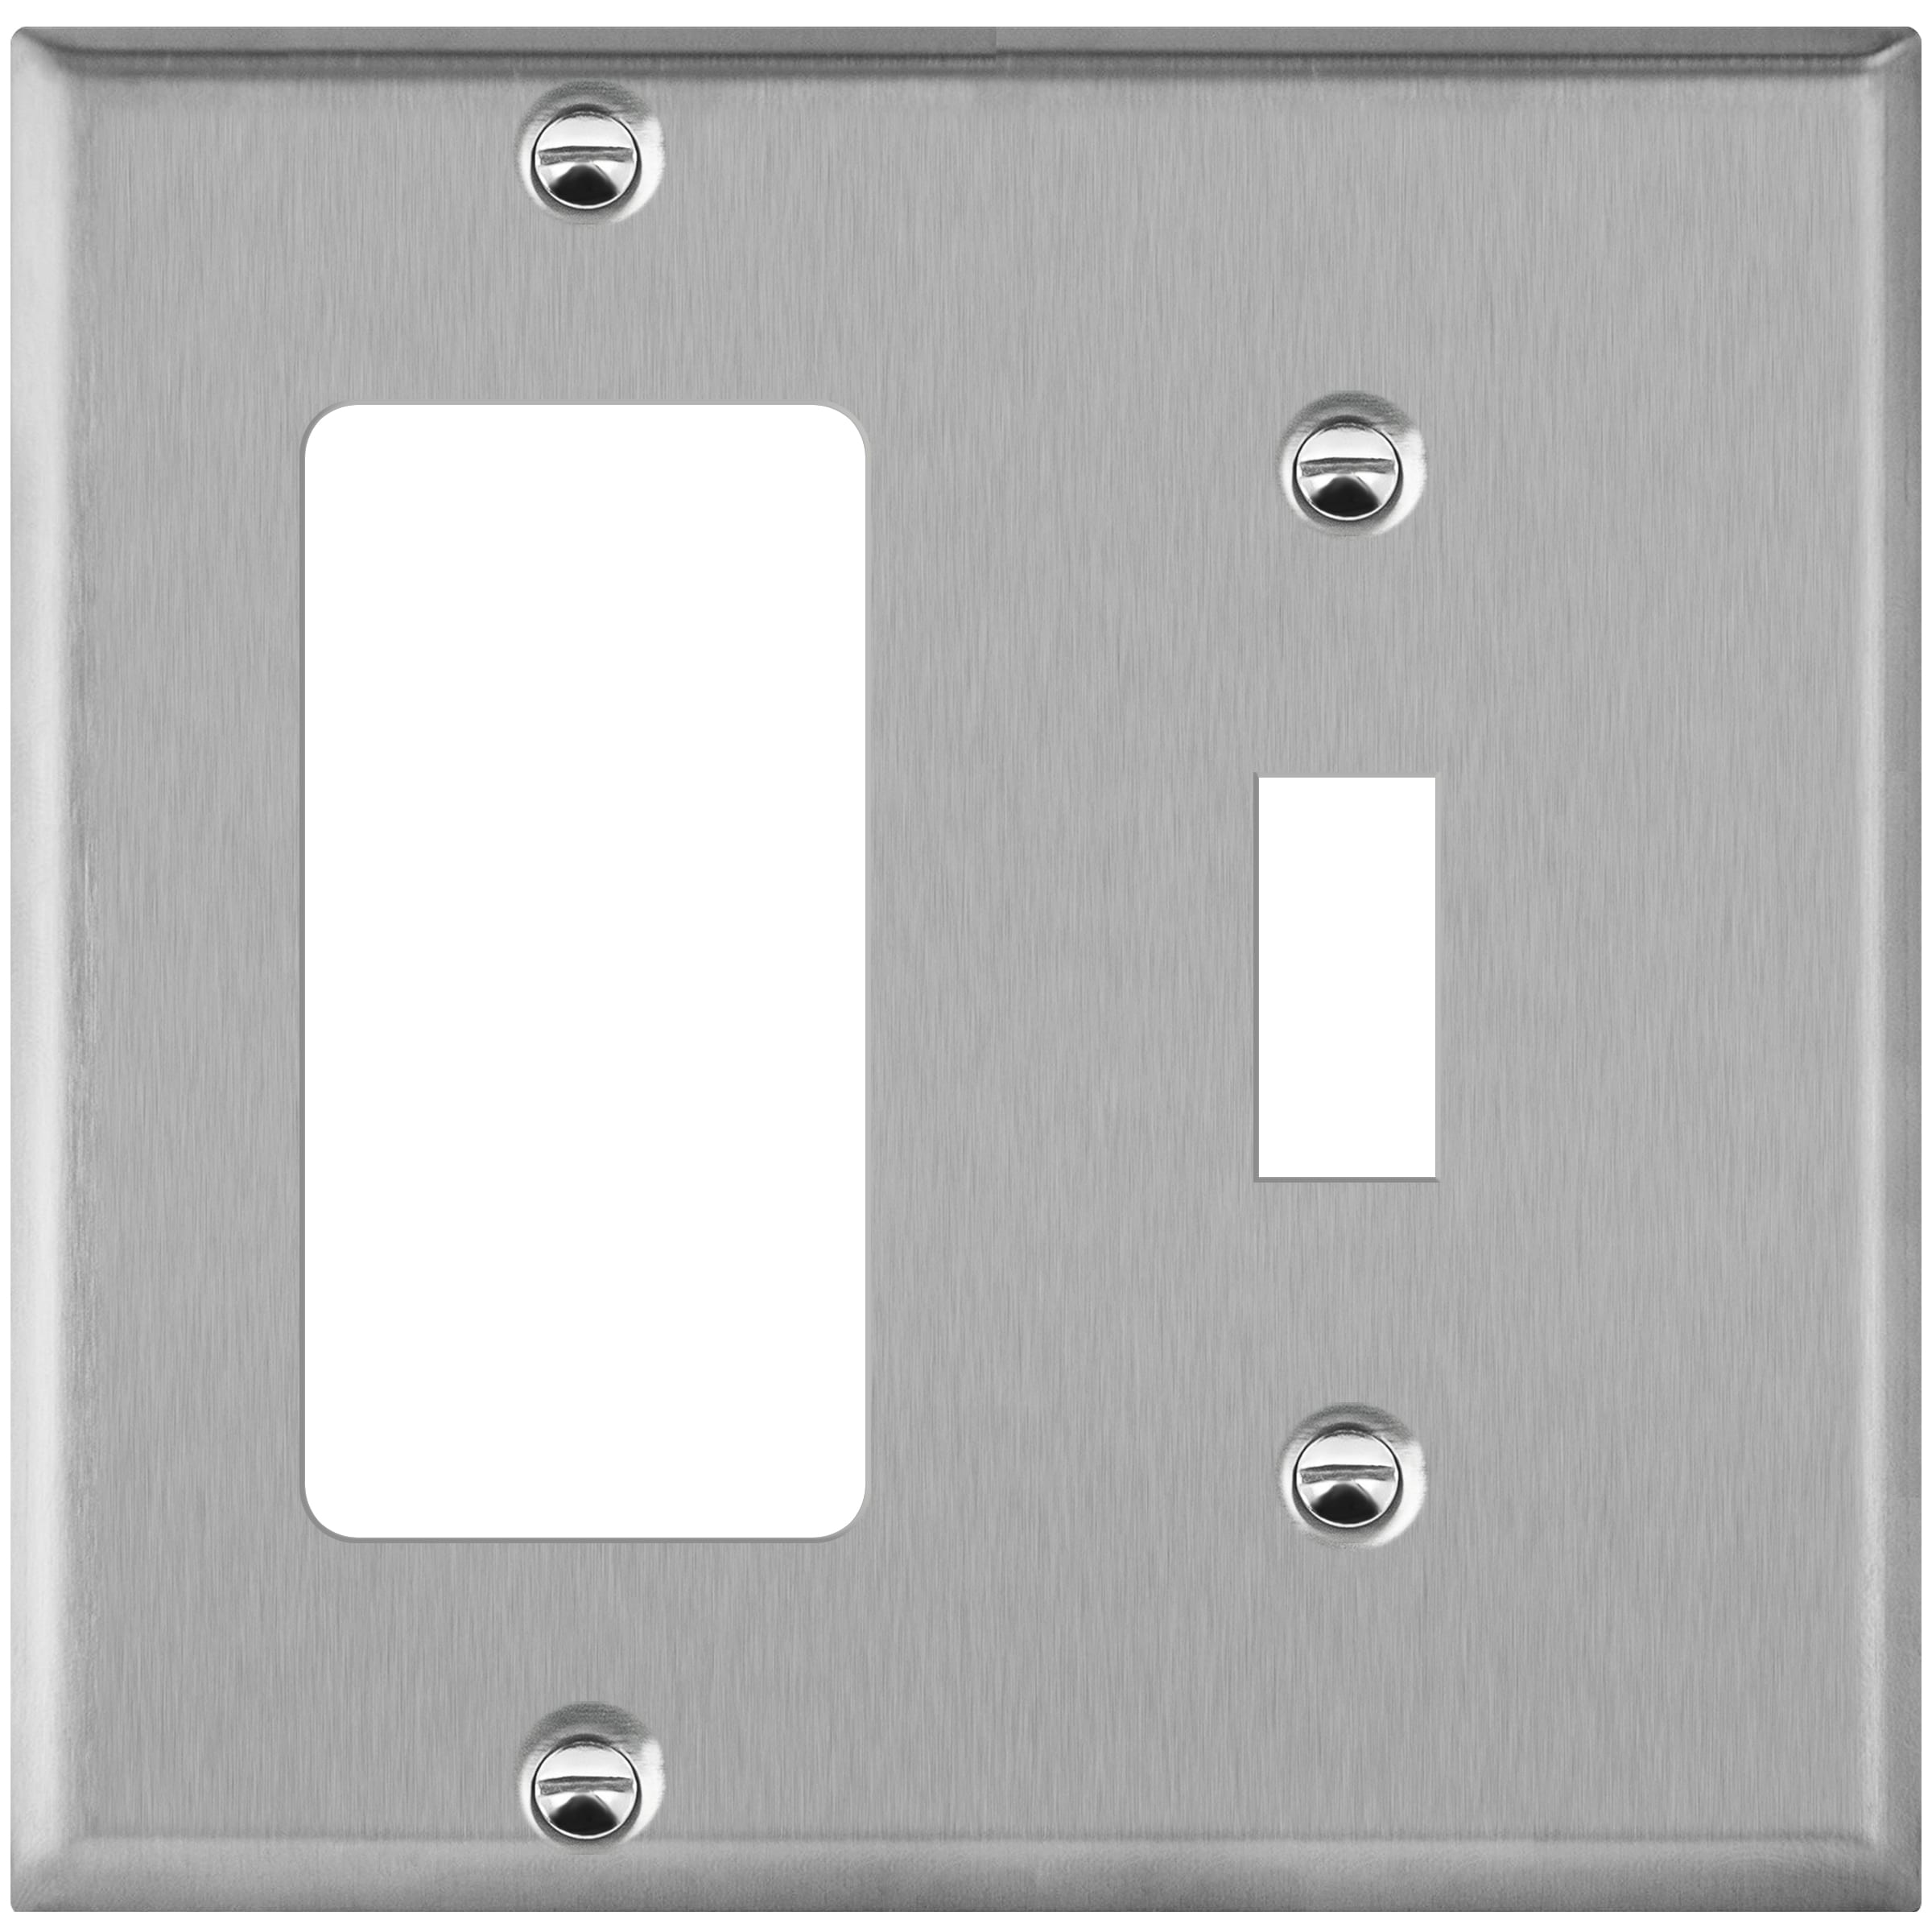 Durable Decorative Outlet Wall Plate Cover Stainless Steel Light Switch Outlet Plate Cover Anti-Corrosion Electric Socket Cover MFE Wall Plate Cover for Switches, 1-Pack